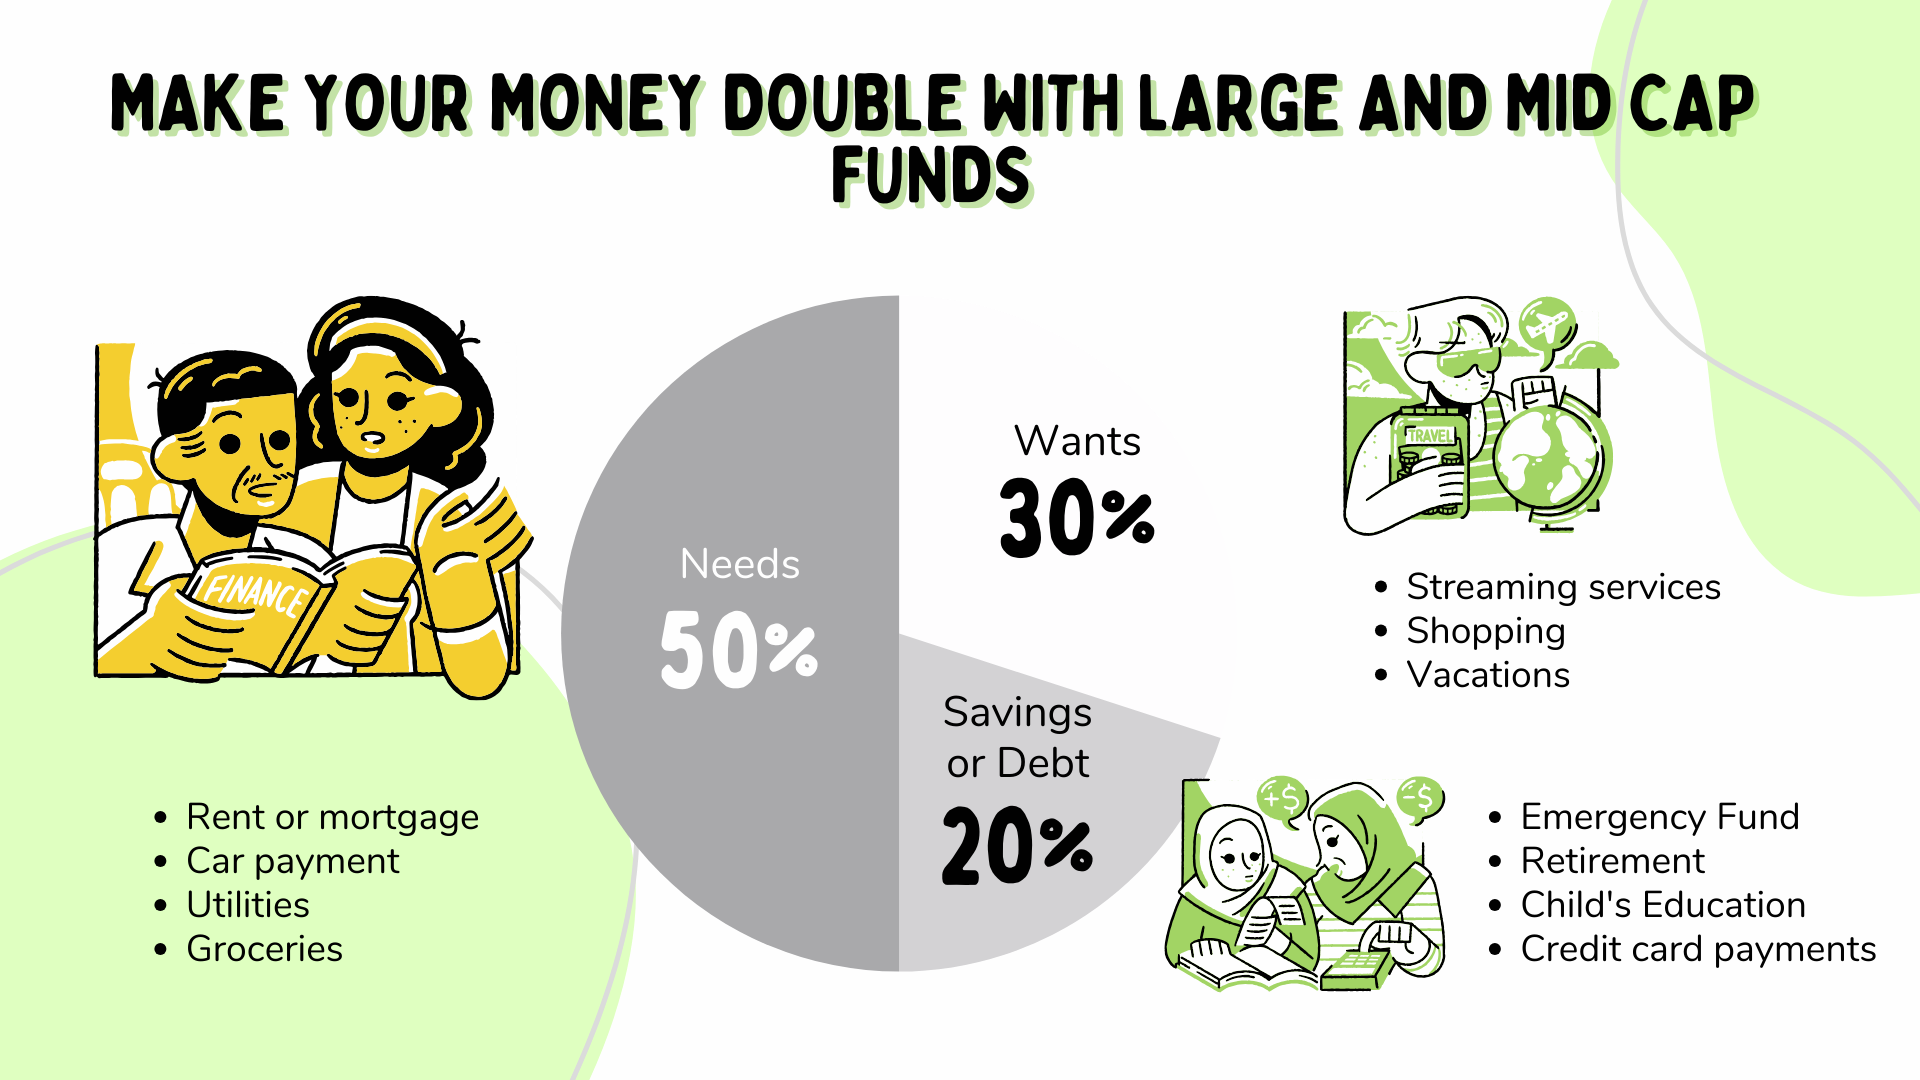 Make Your Money Double with Large and Mid Cap Funds